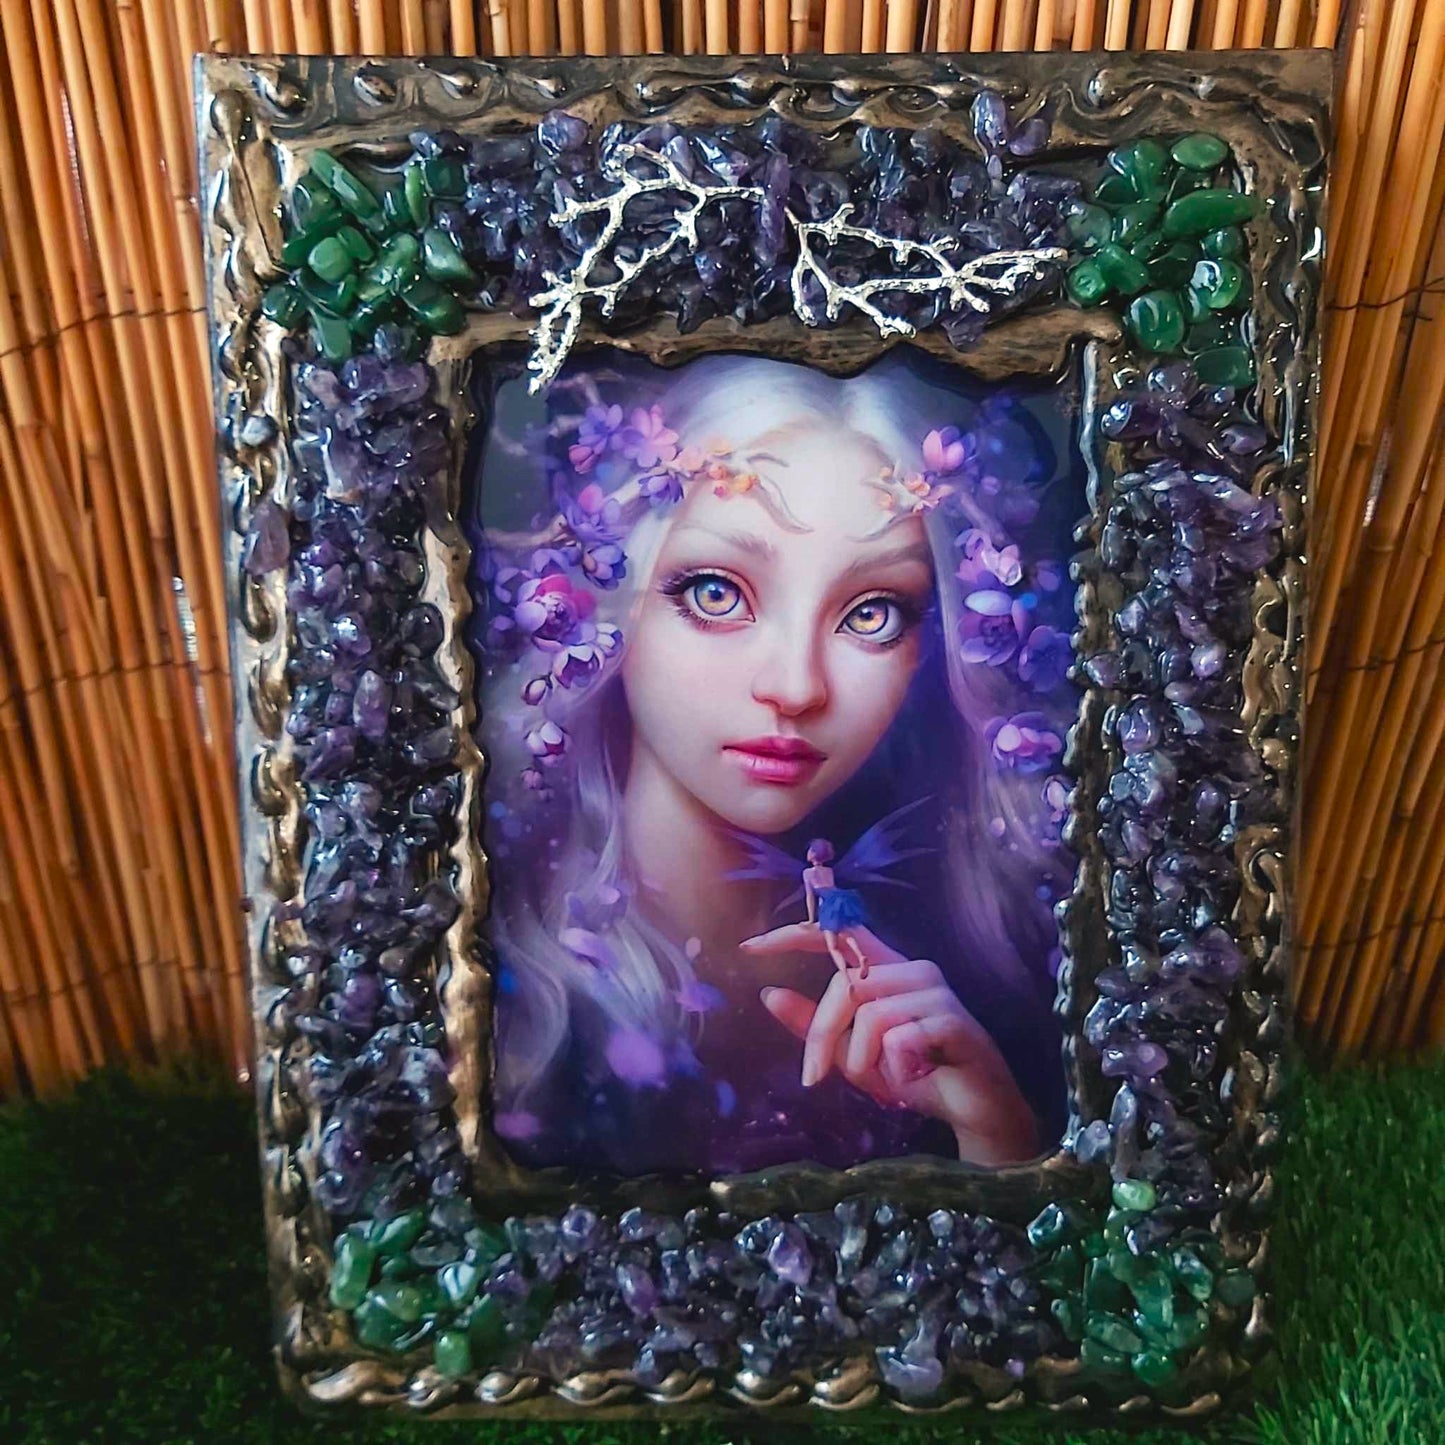 A4 Handmade Crystal Journal Diary Notebook with Amethyst